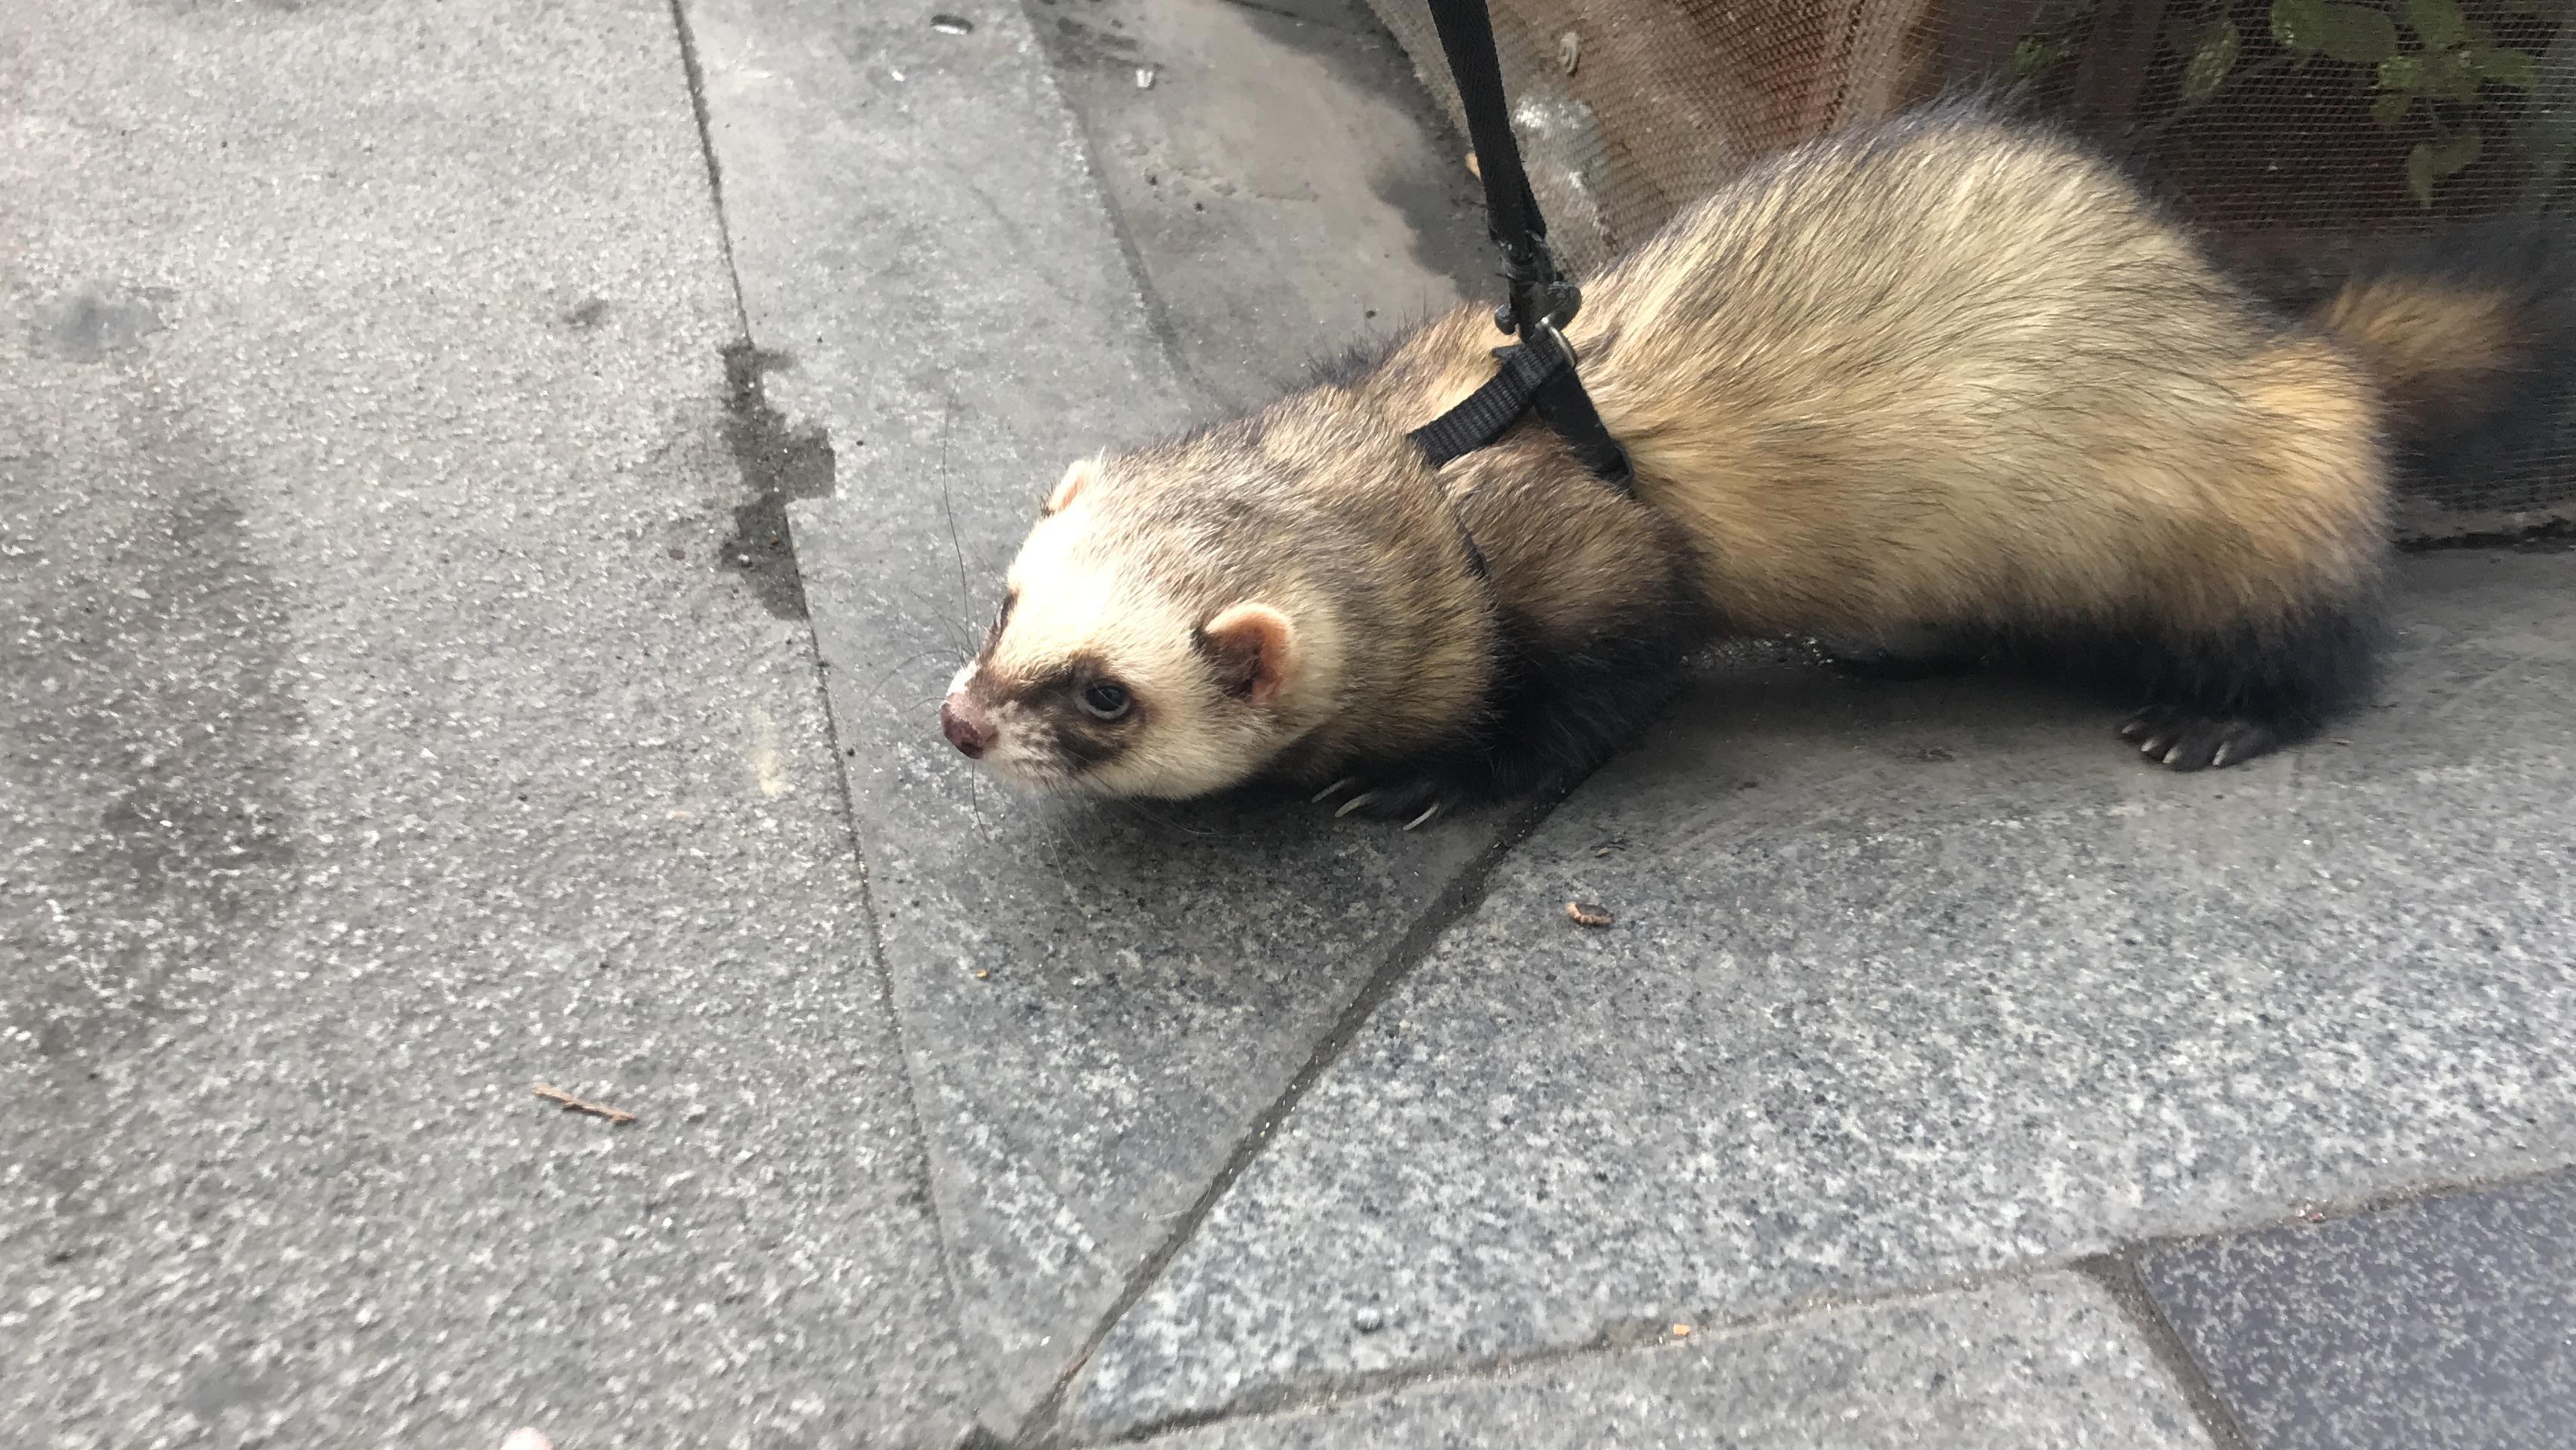 Walked at Taksim Square with a ferret on a leash; people were amazed